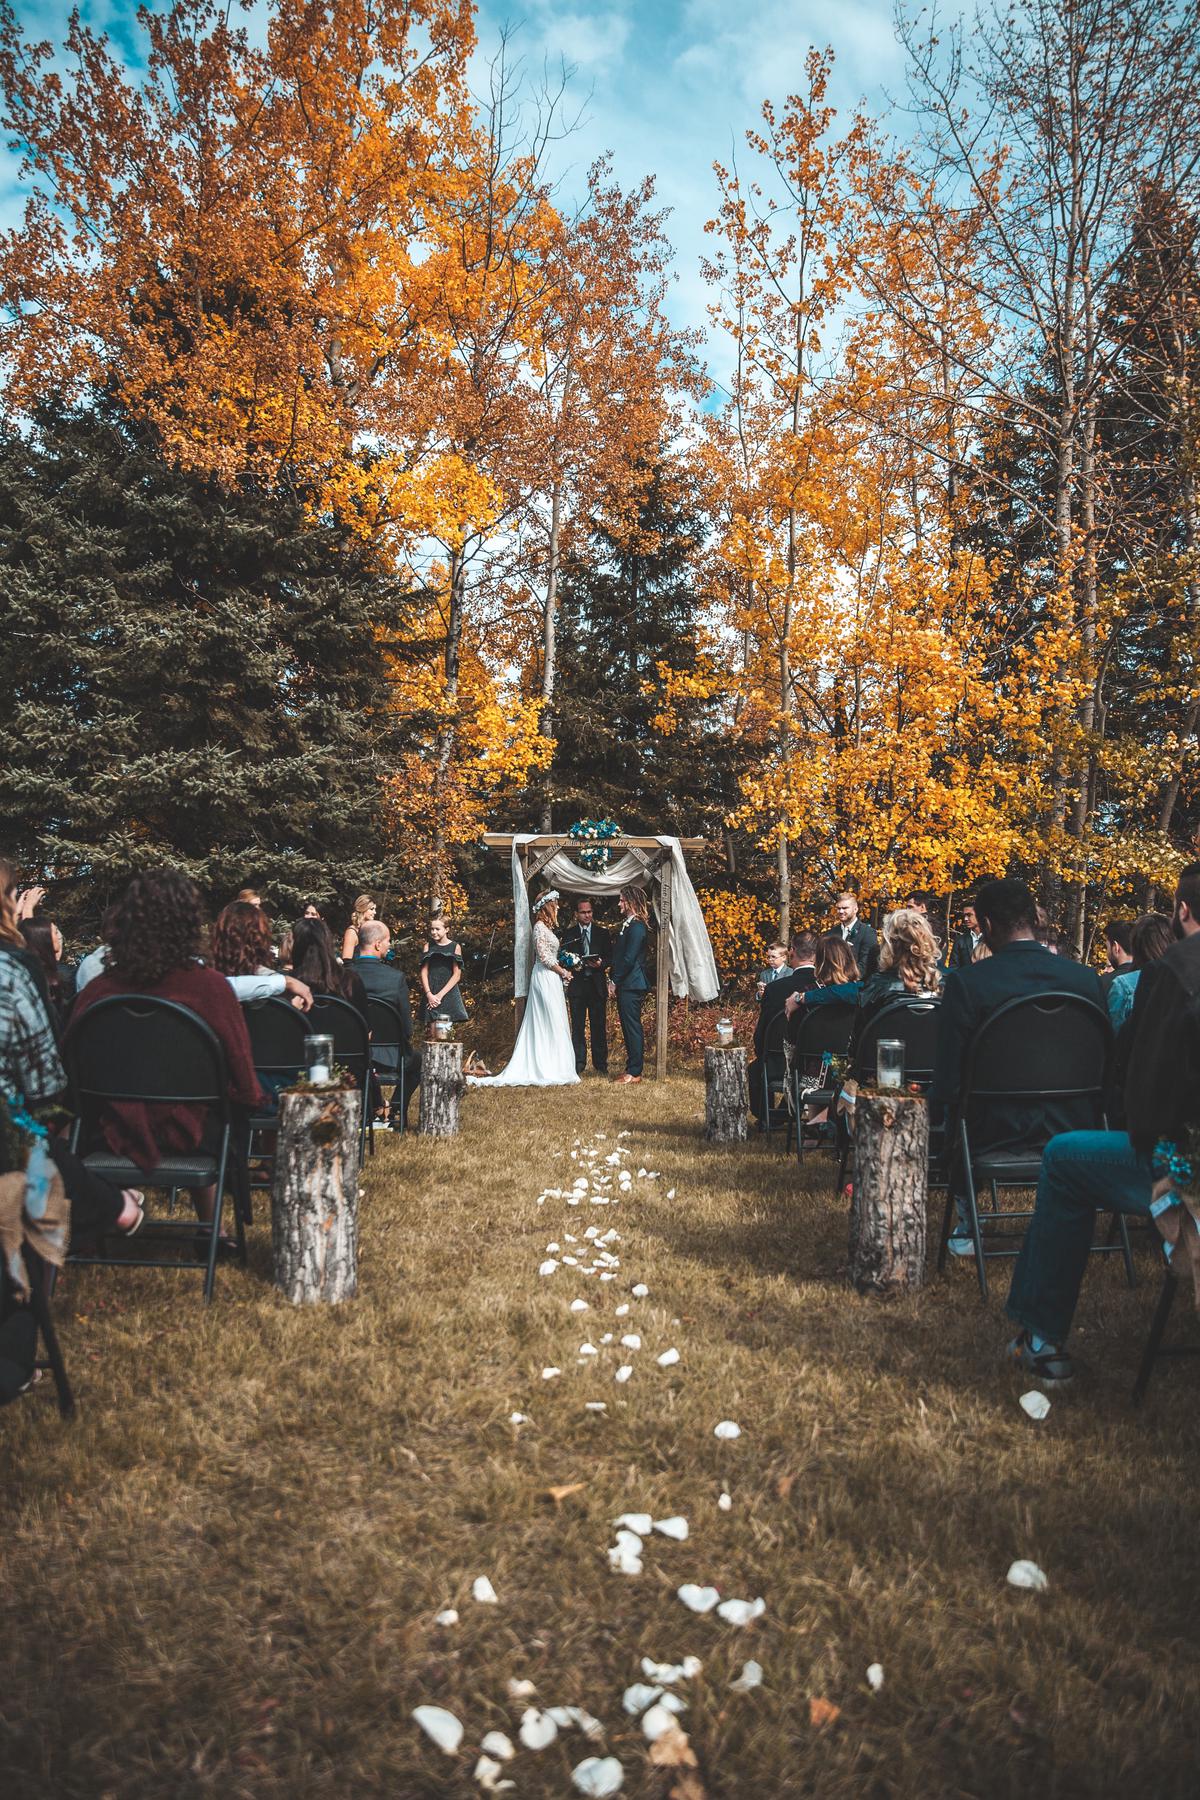 A photographer holding a camera and taking a picture during a wedding ceremony, showcasing the importance of having the right lenses for event photography